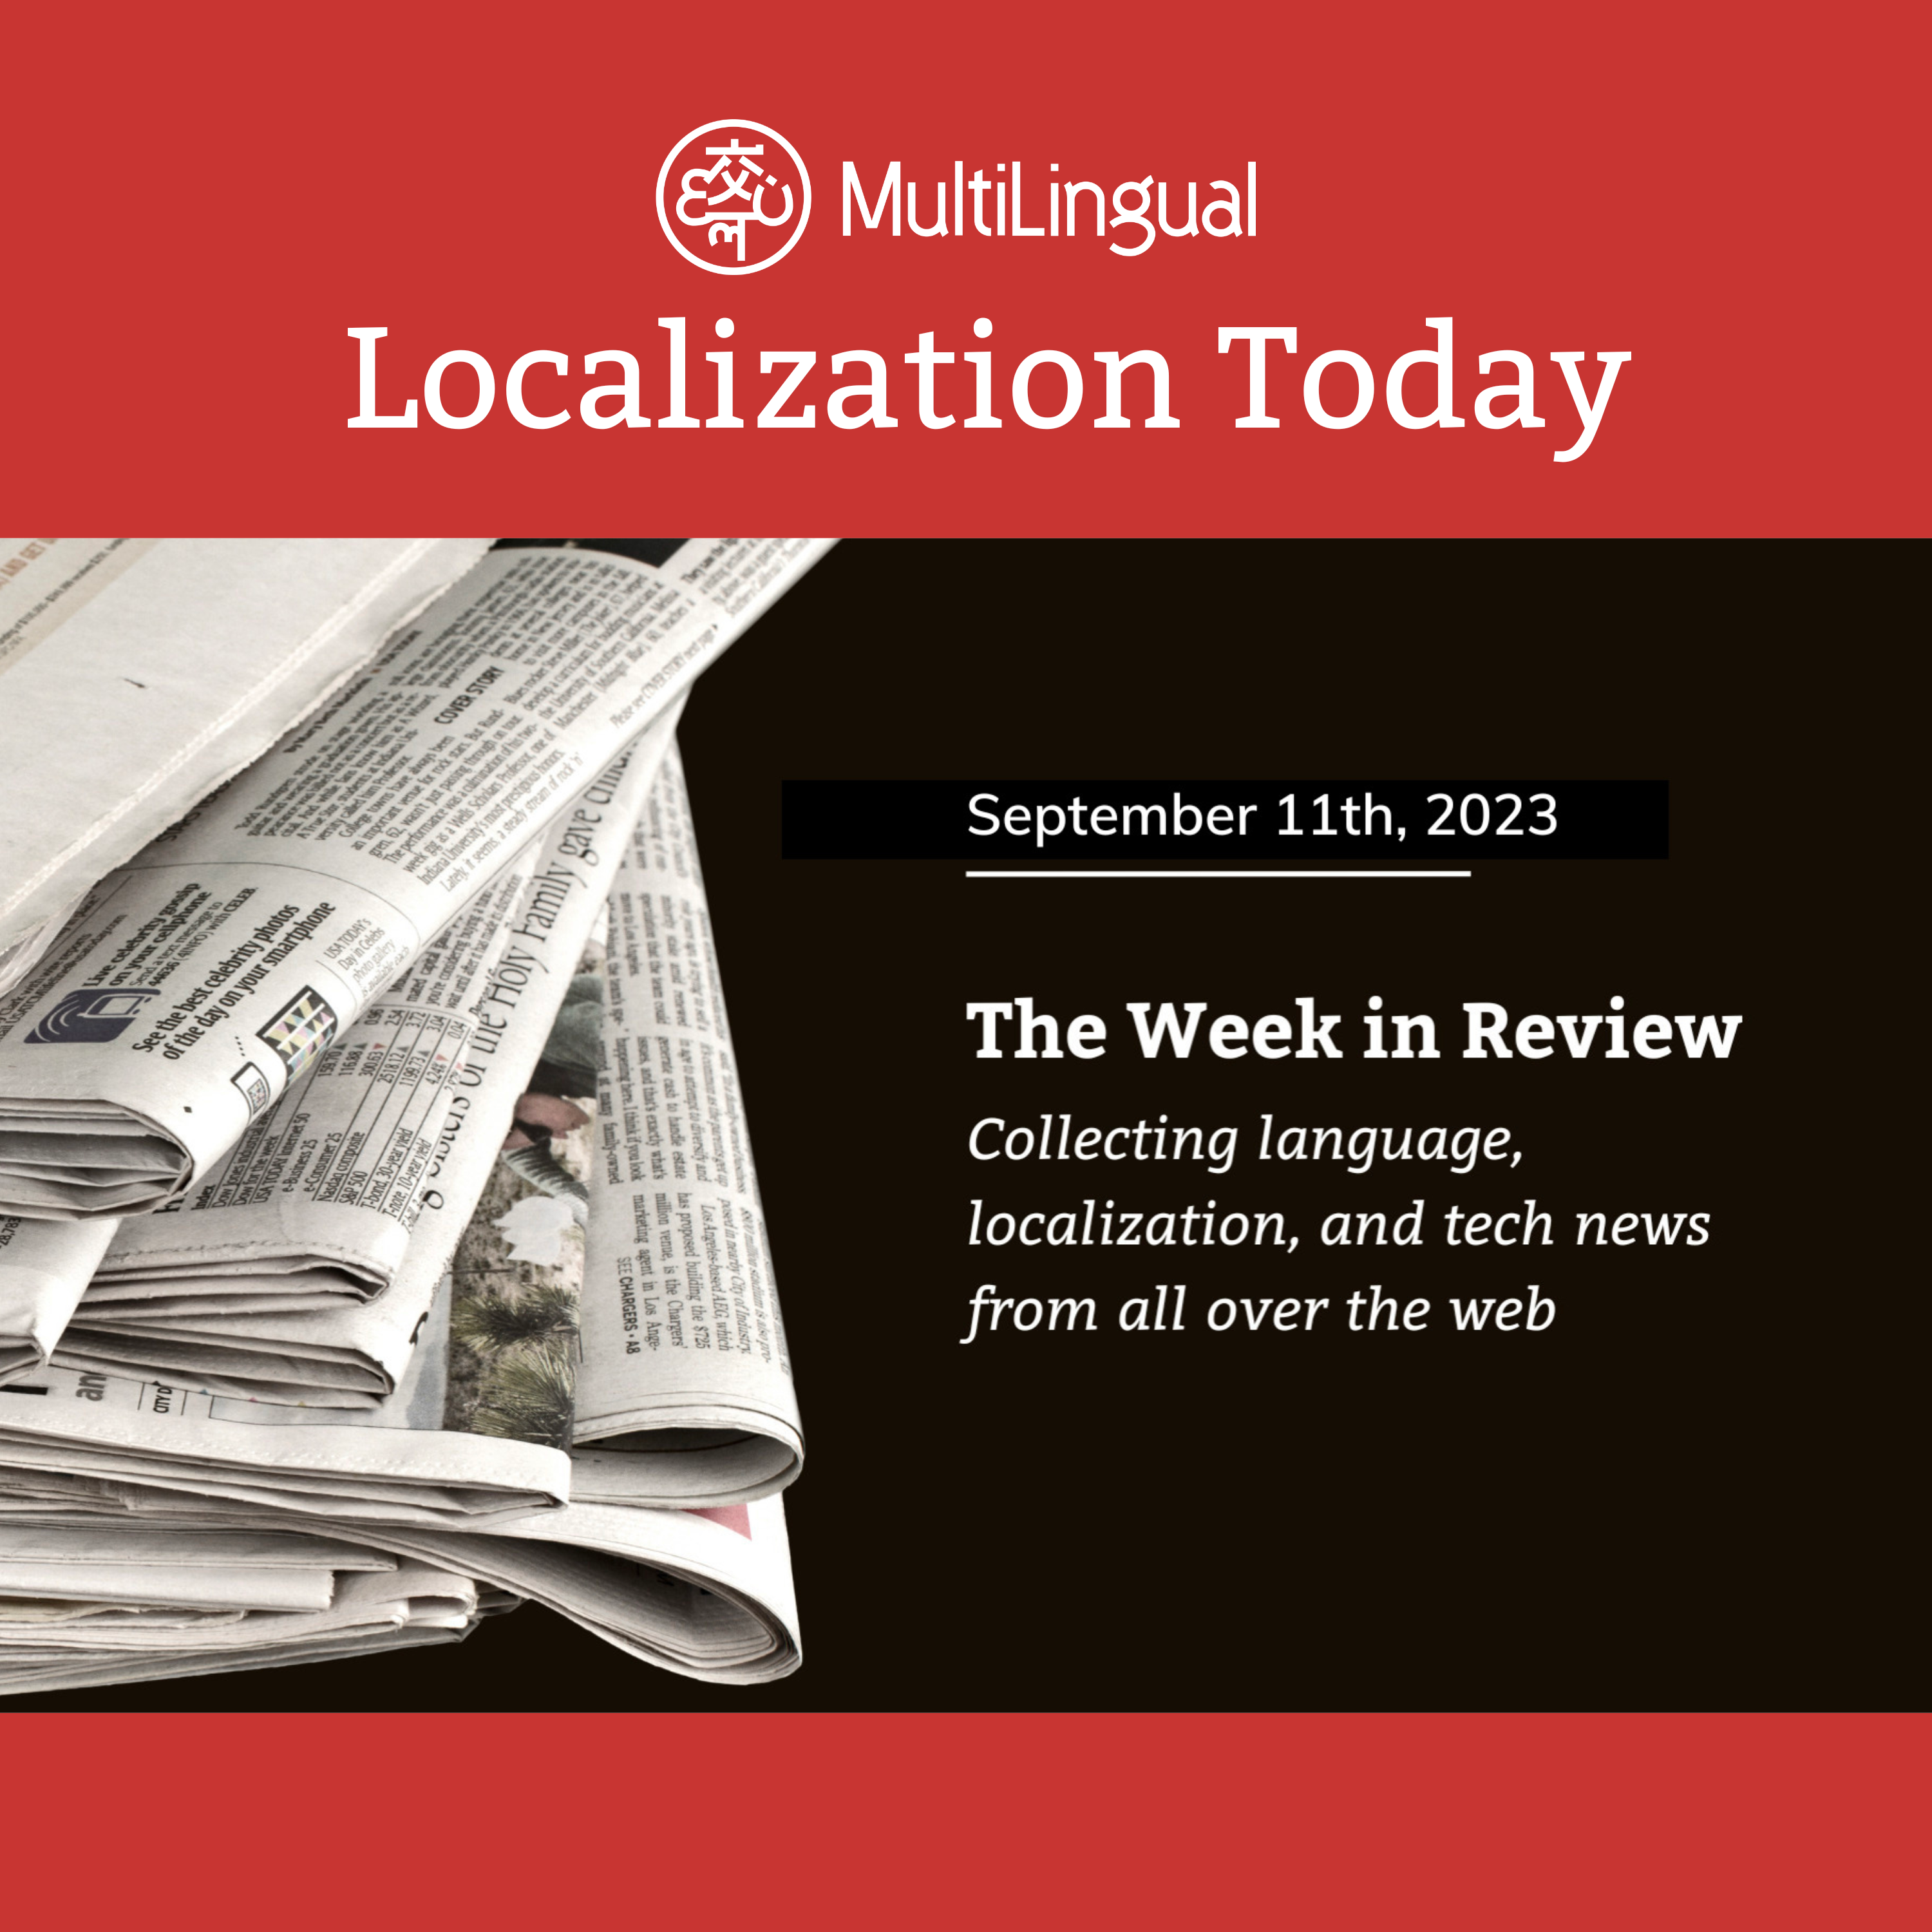 The Week in Review: September 11, 2023